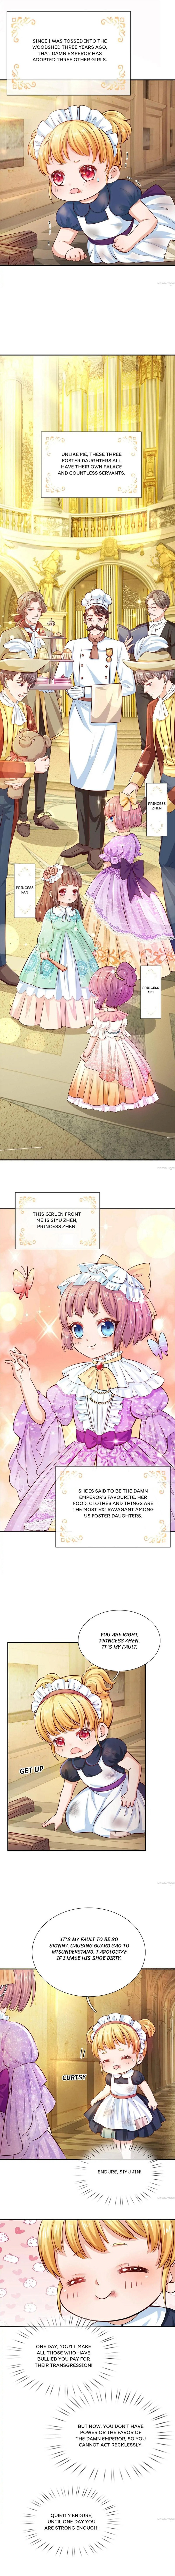 The Beginner’S Guide To Be A Princess - Page 2